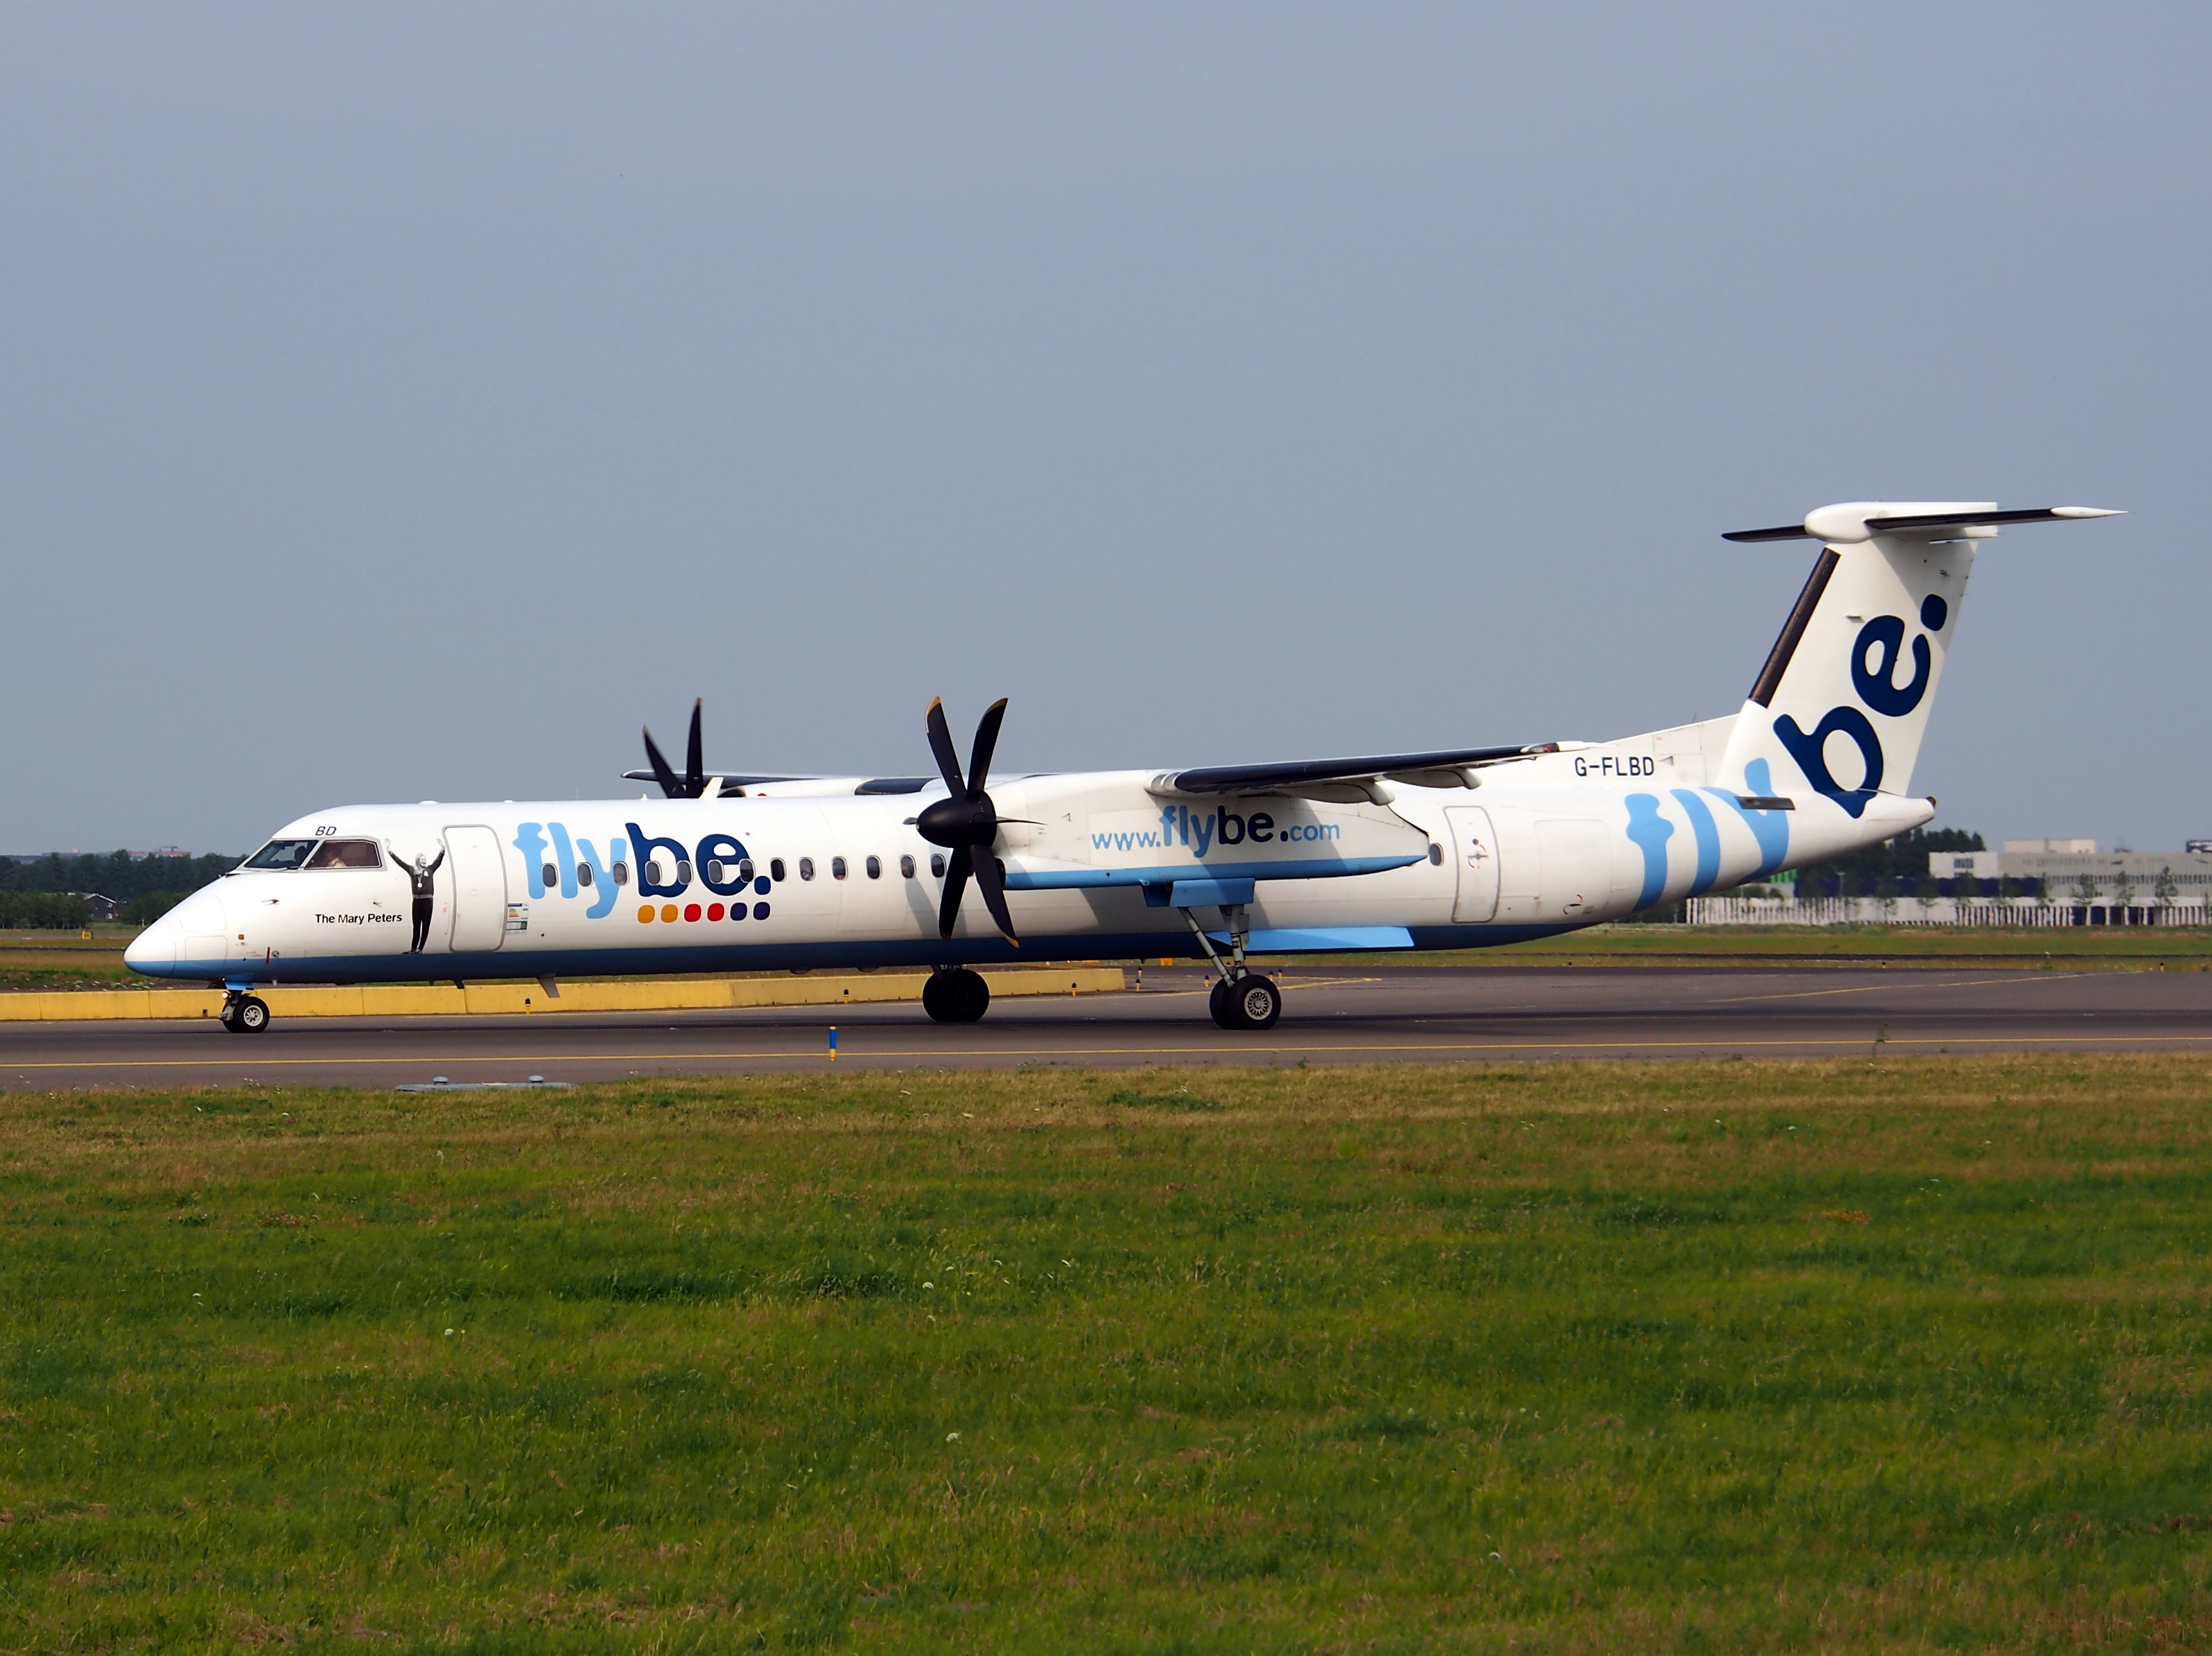 G-FLBD Flybe De Havilland Canada DHC-8-402Q Dash 8 - cn 4259, taxiing 22july2013 pic-002